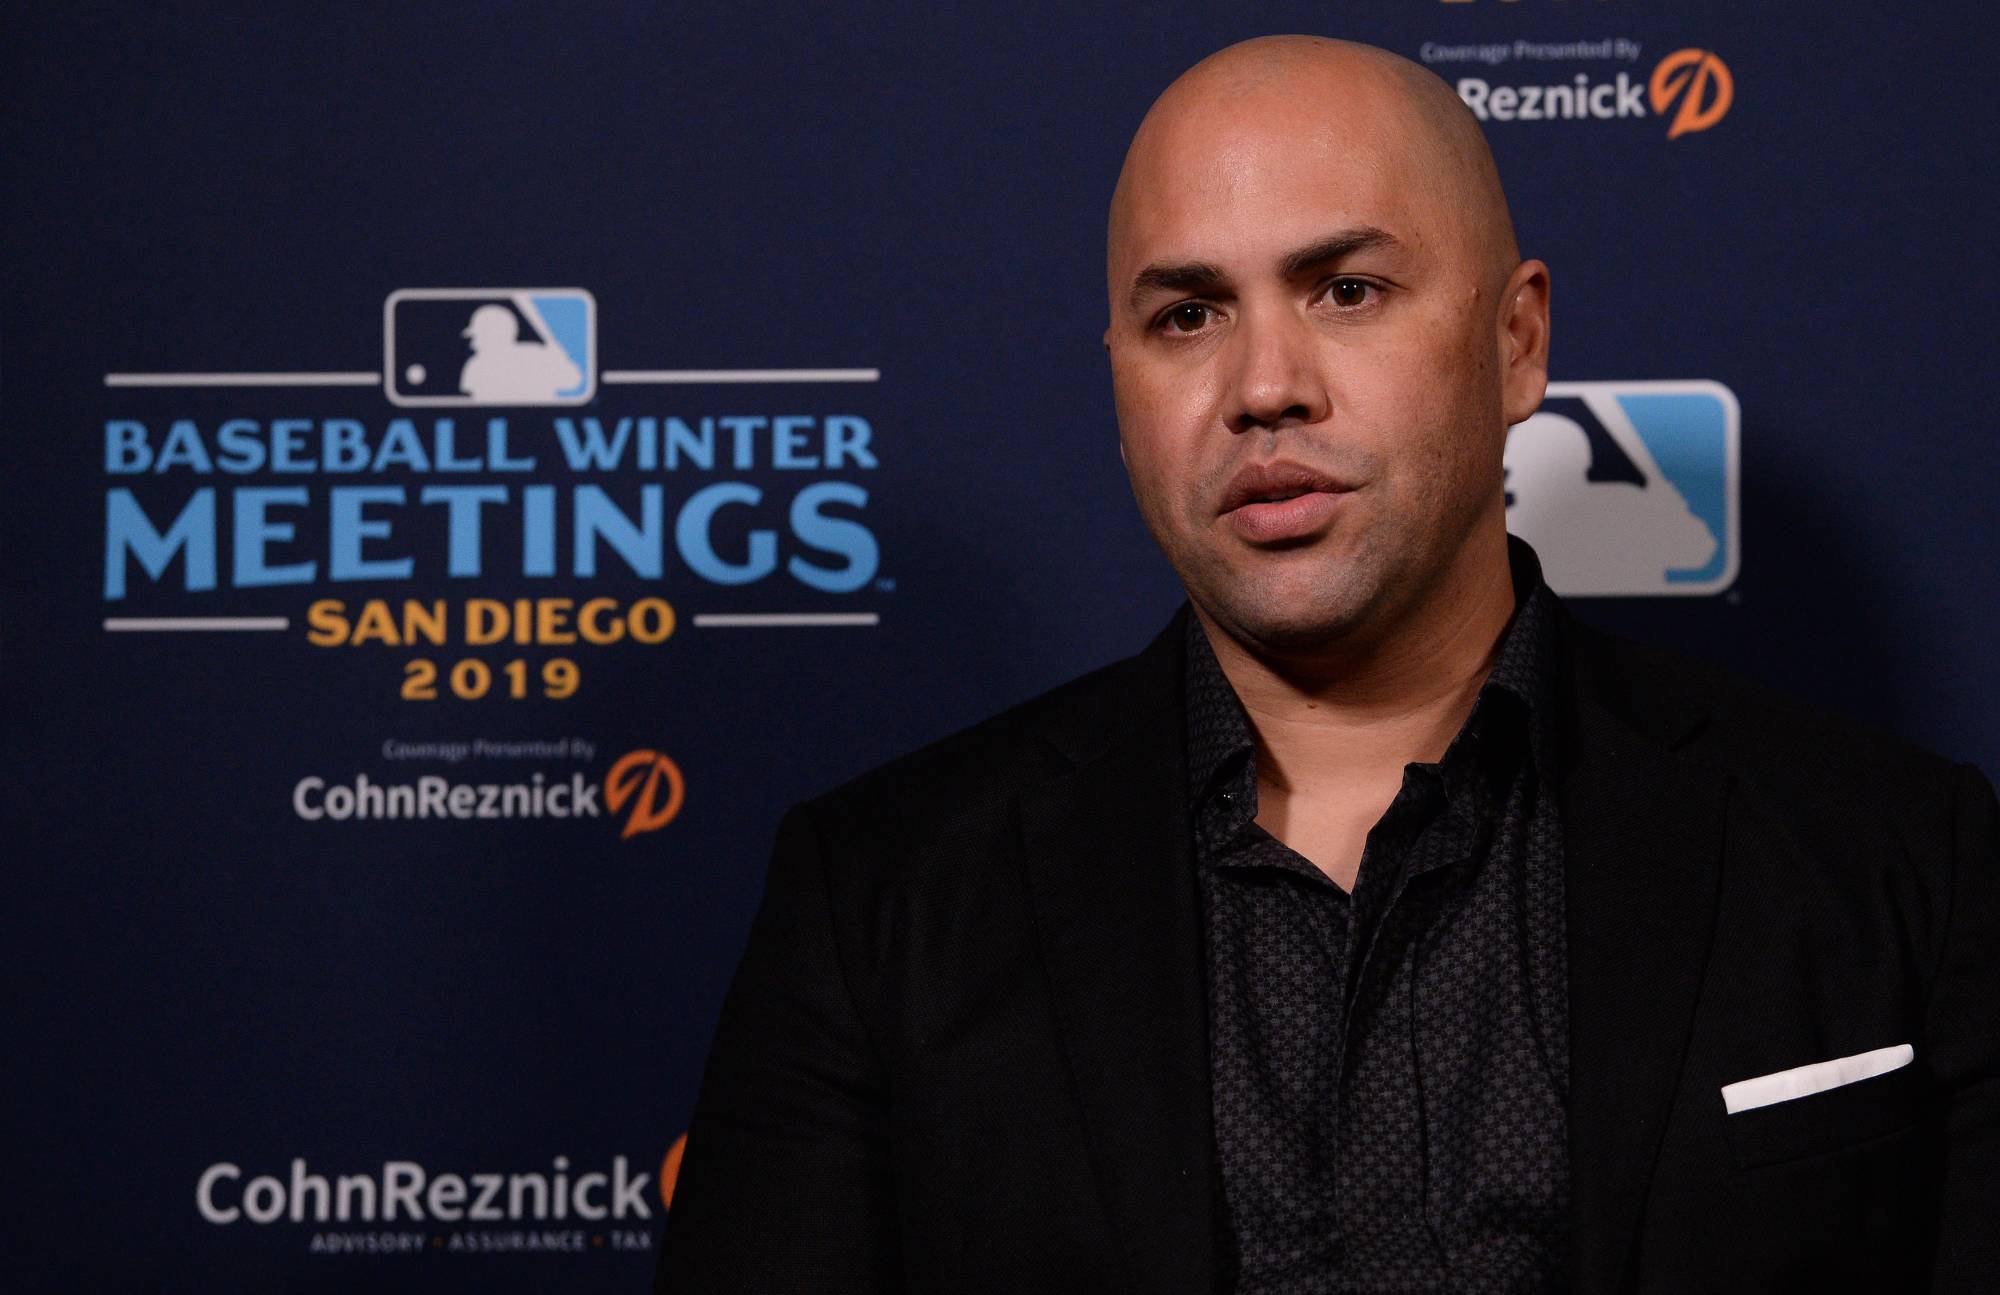 Carlos Beltran: Astros' World Series title 'stained' by scandal